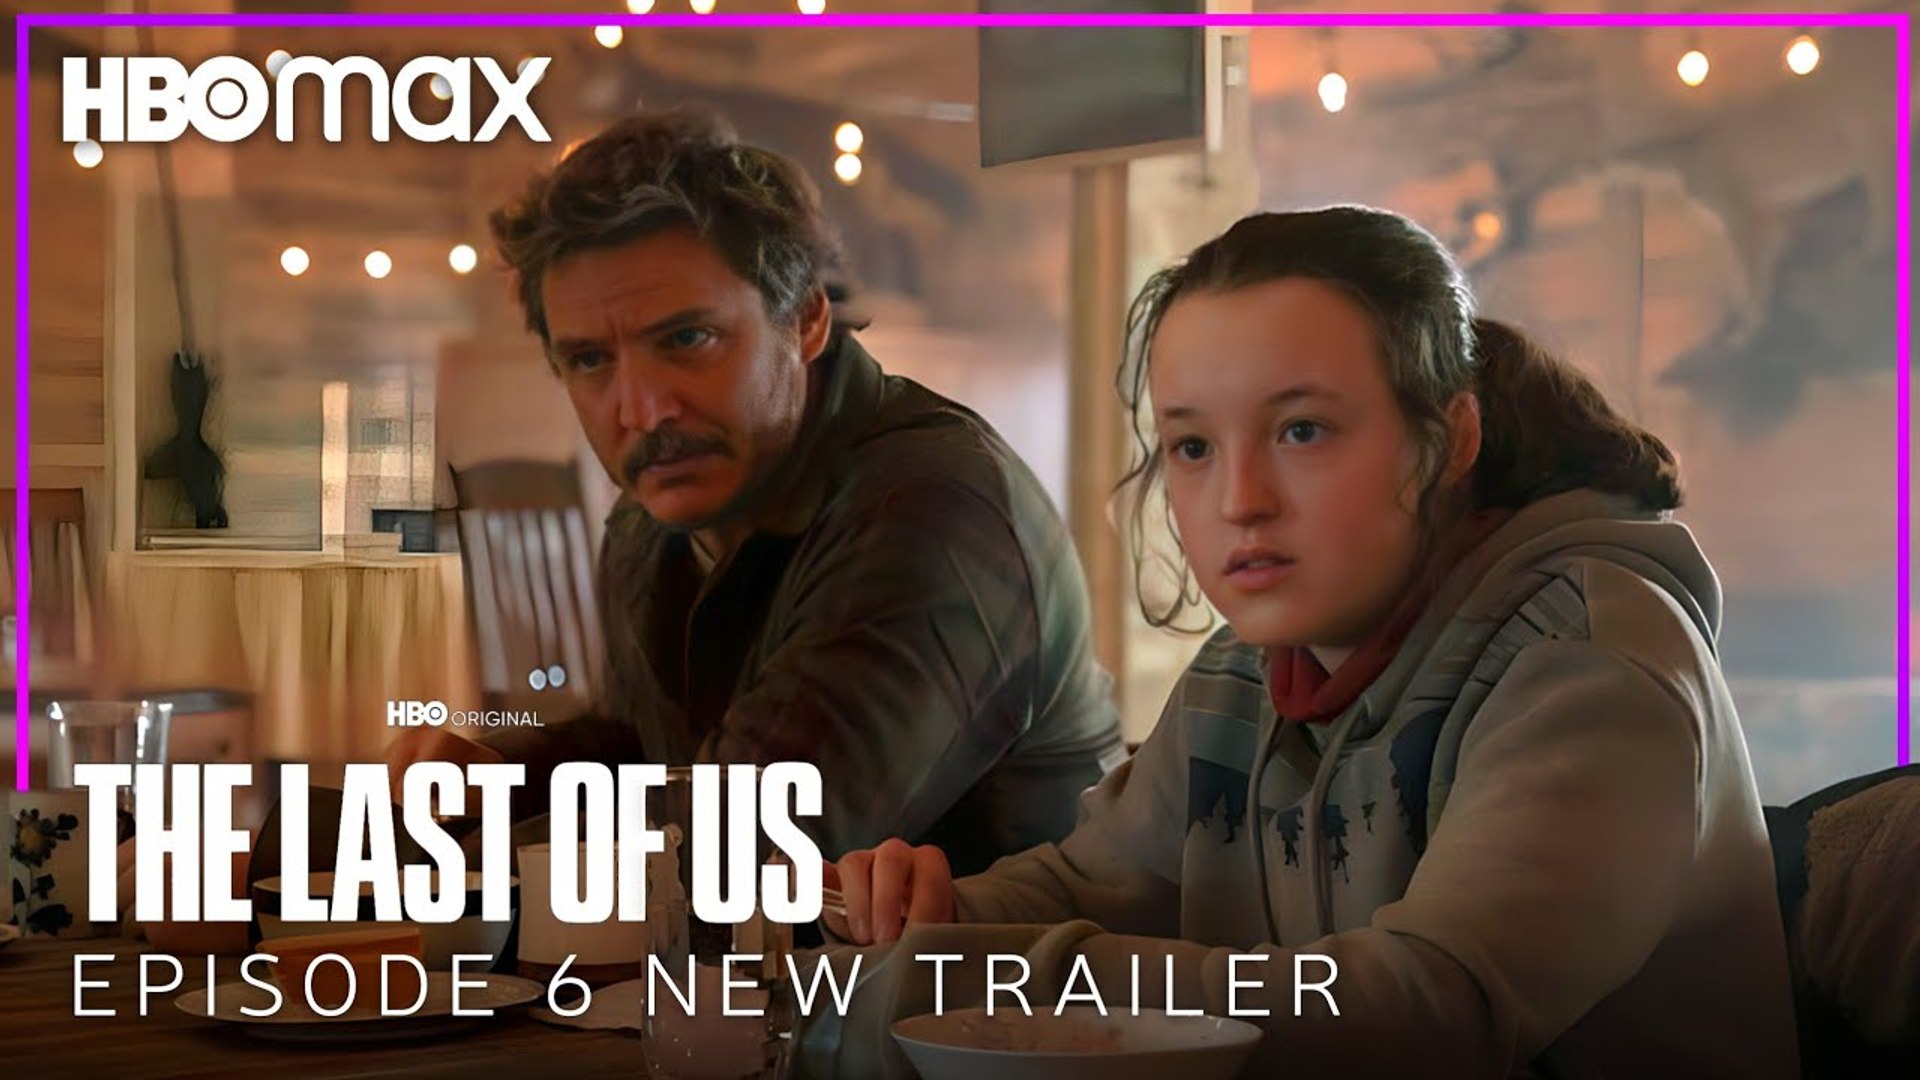 Full trailer for HBO Max's 'The Last of Us